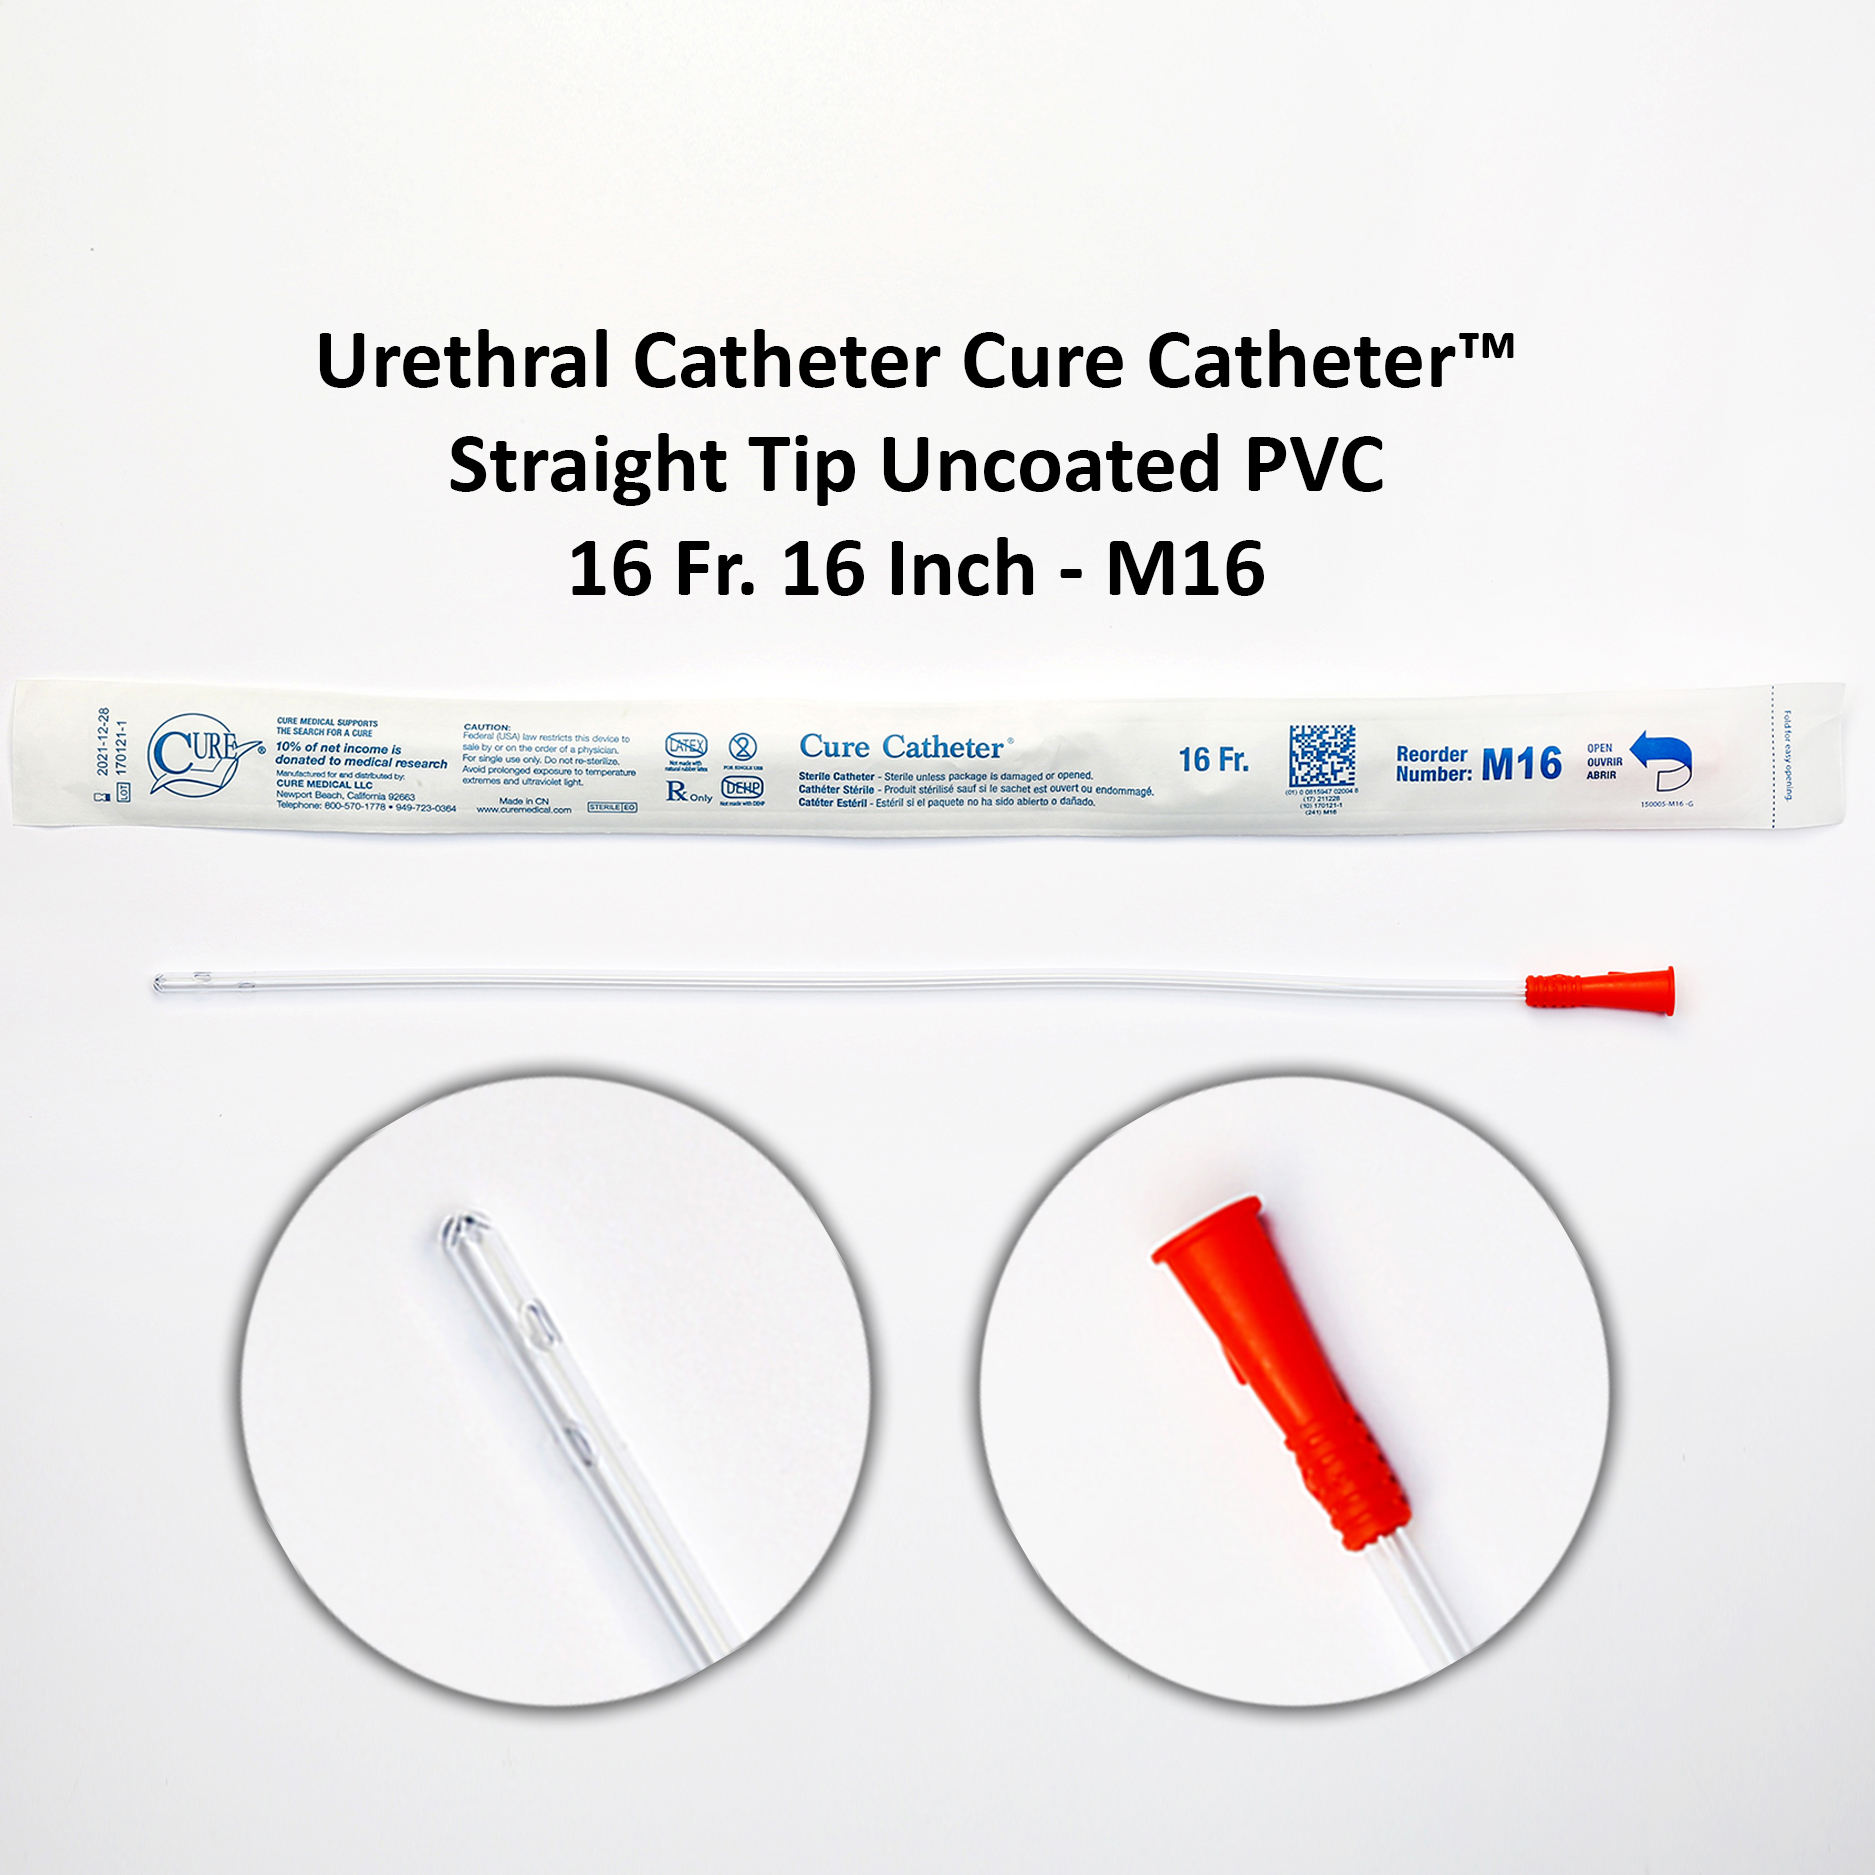 Urethral Catheter Cure Catheter™ Straight Tip Uncoated PVC 16 Fr. 16 Inch - M16